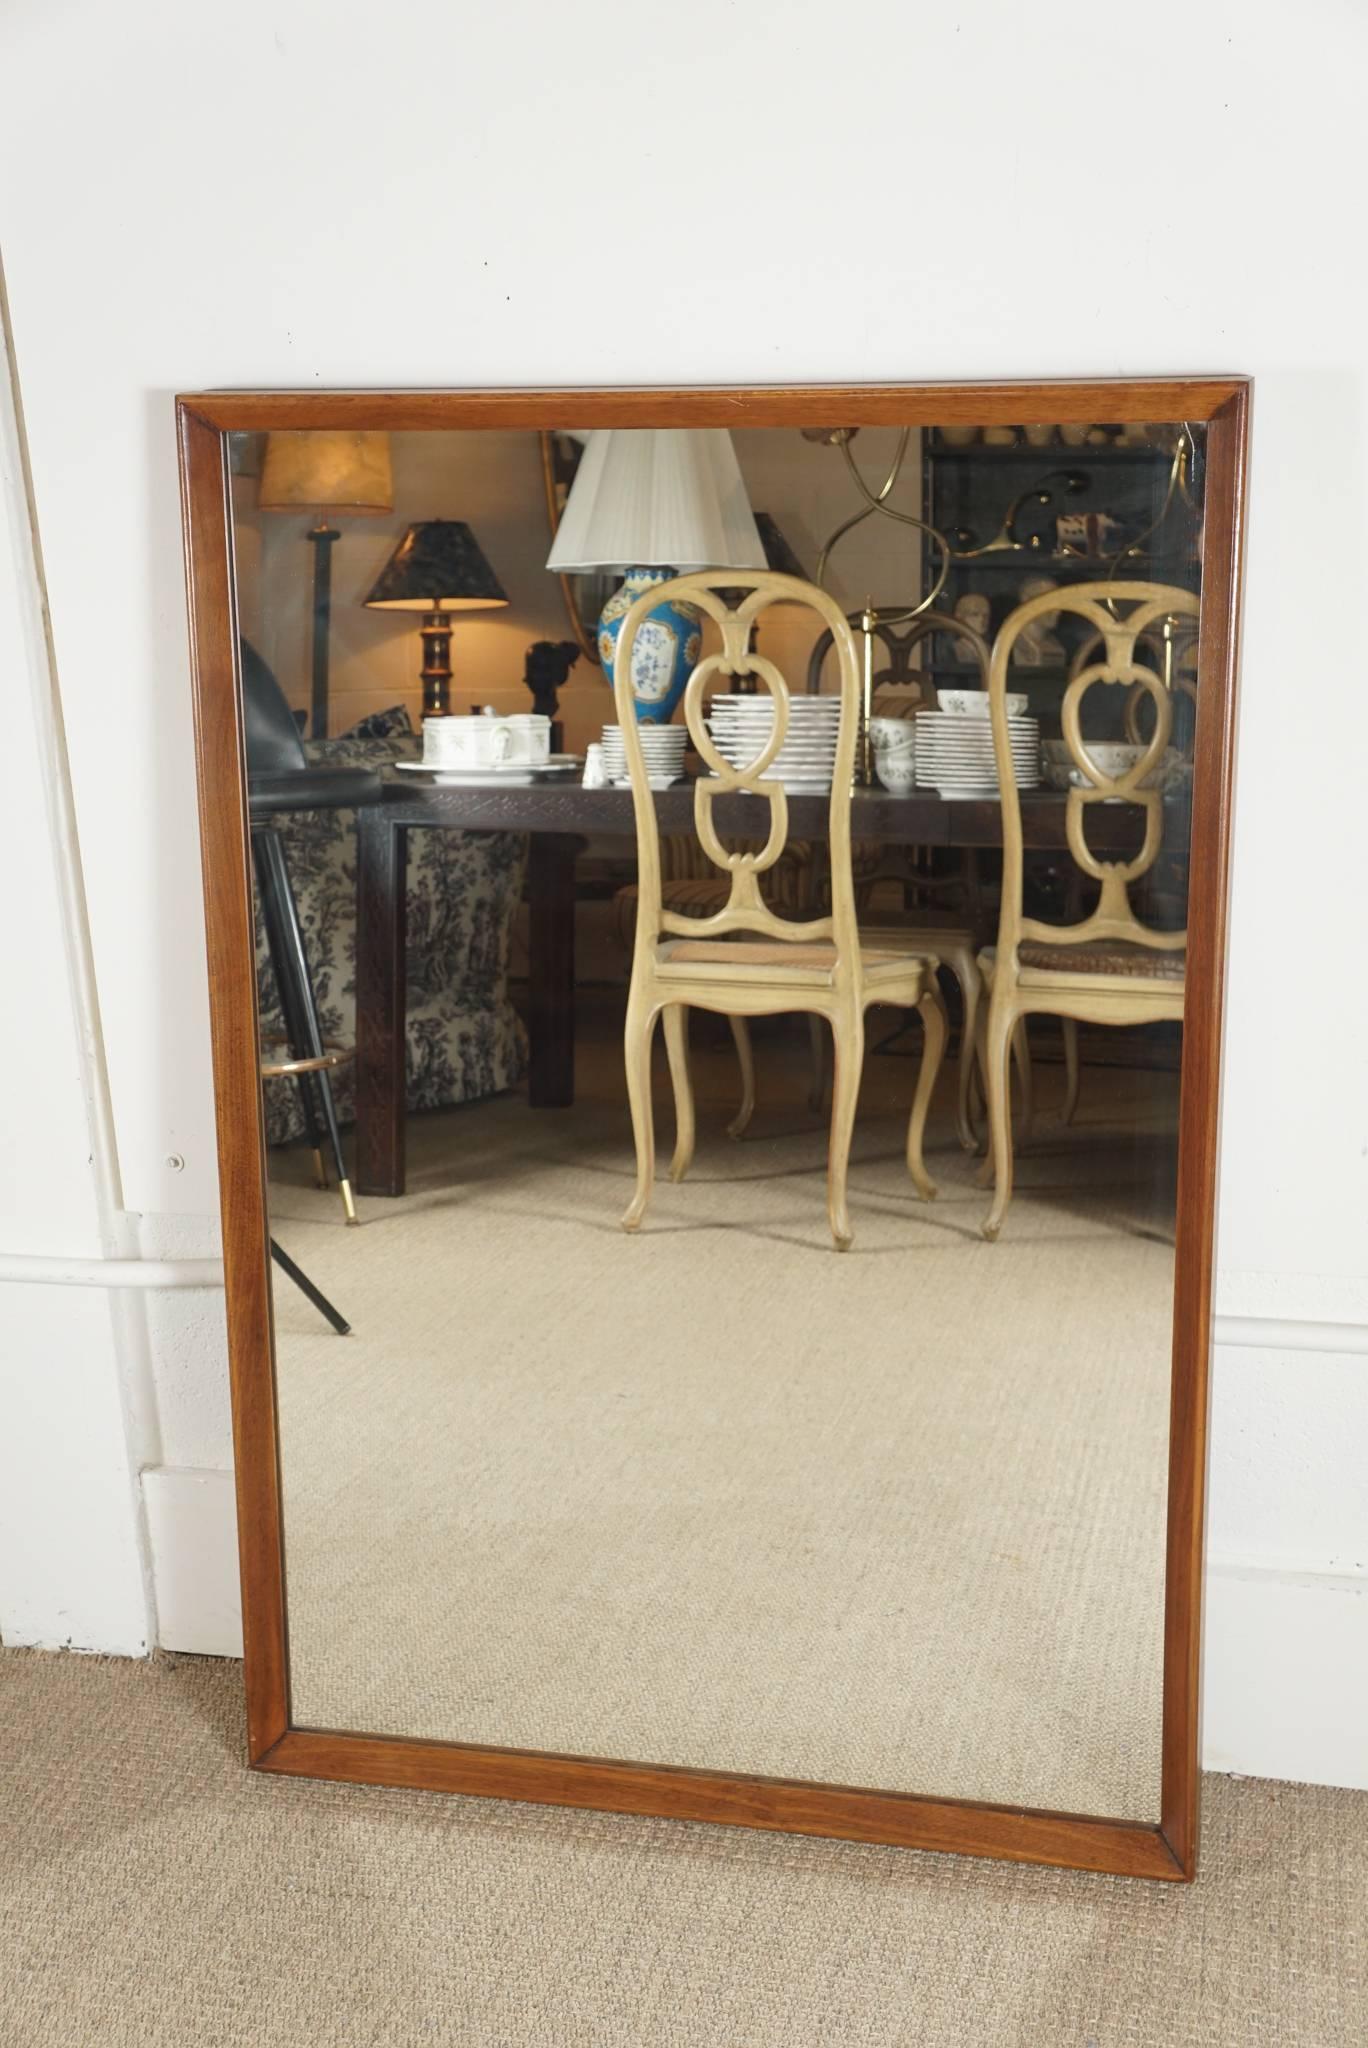 Here is a great modern rectangular mirror with an inset border in solid walnut.